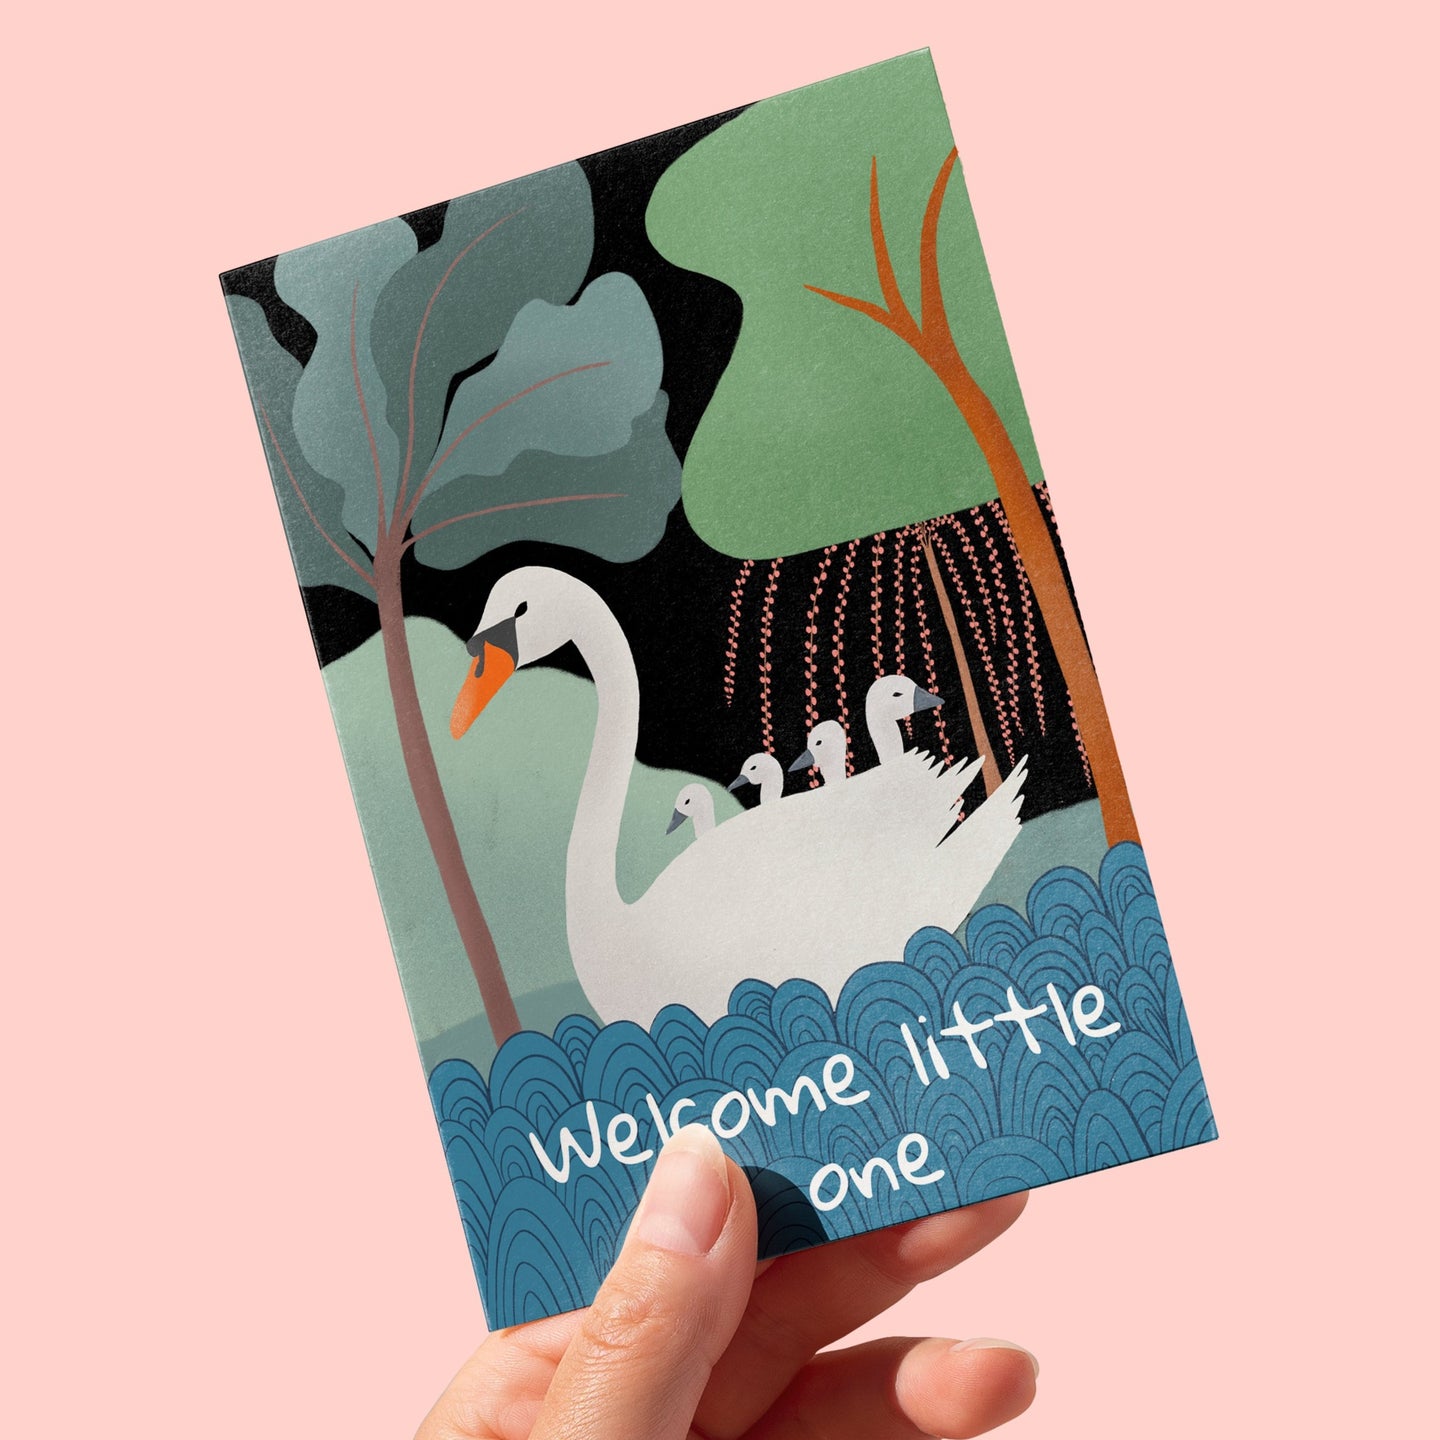 Baby cygnets new baby card